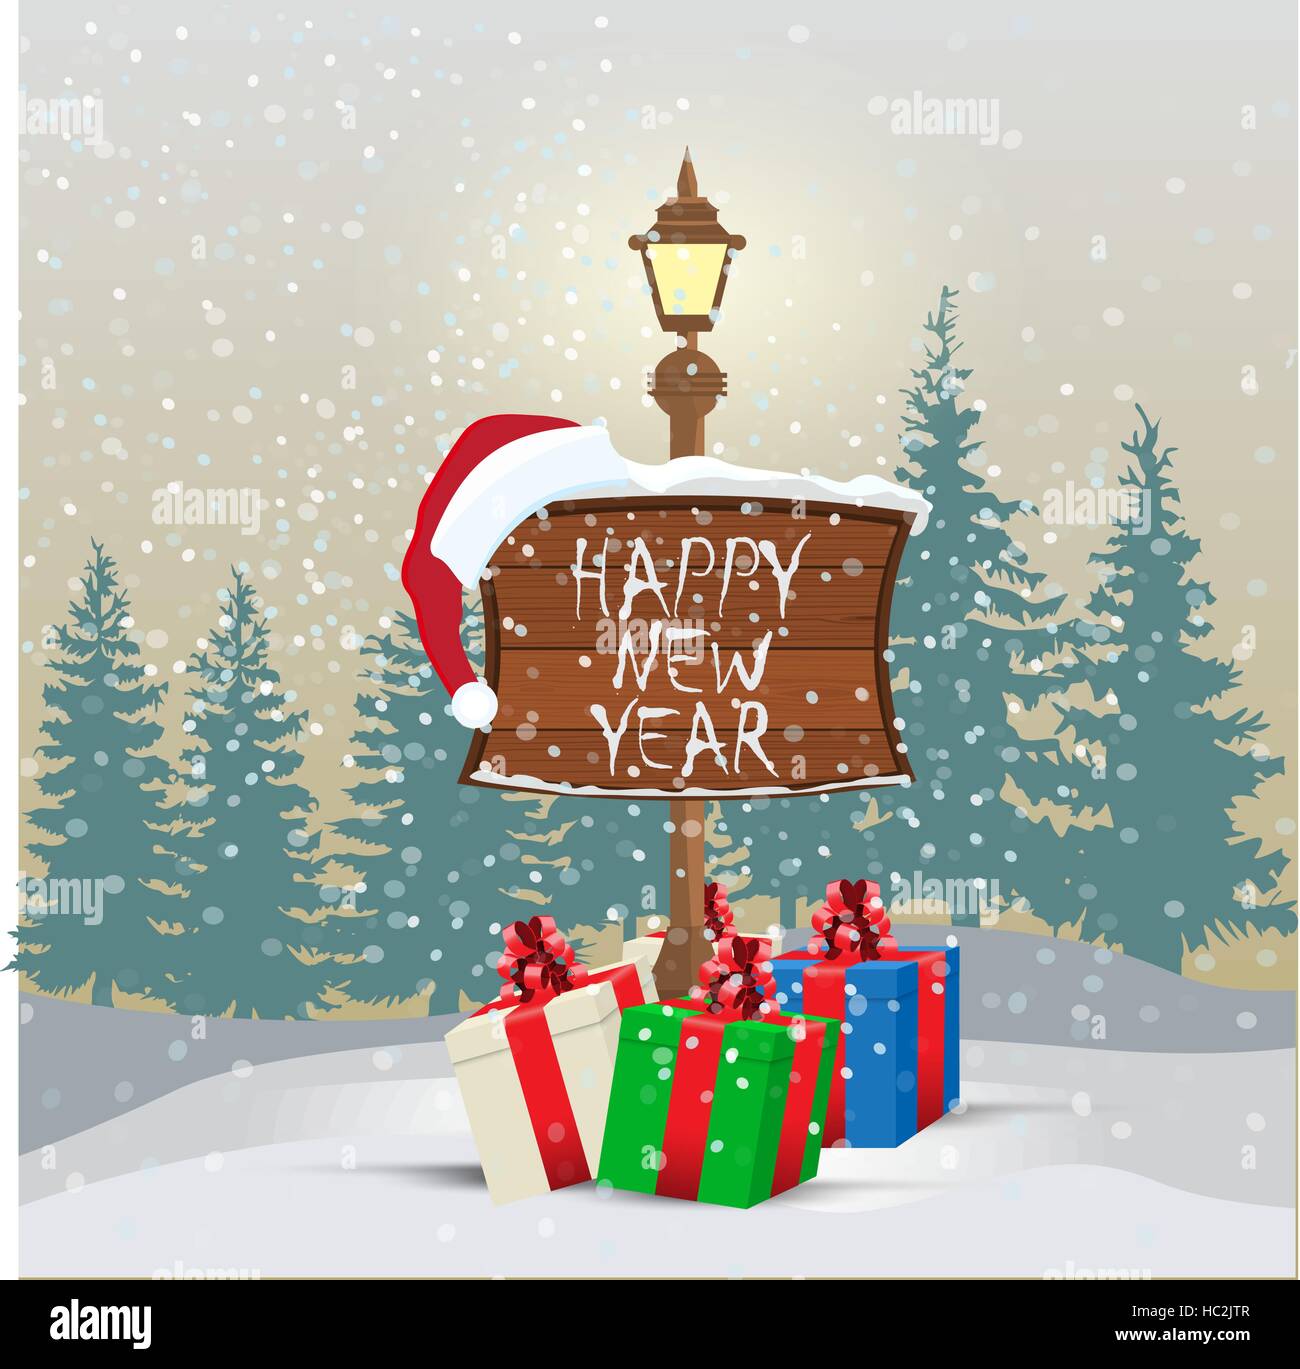 Happy New Year winter background for your greeting card. Stock Vector